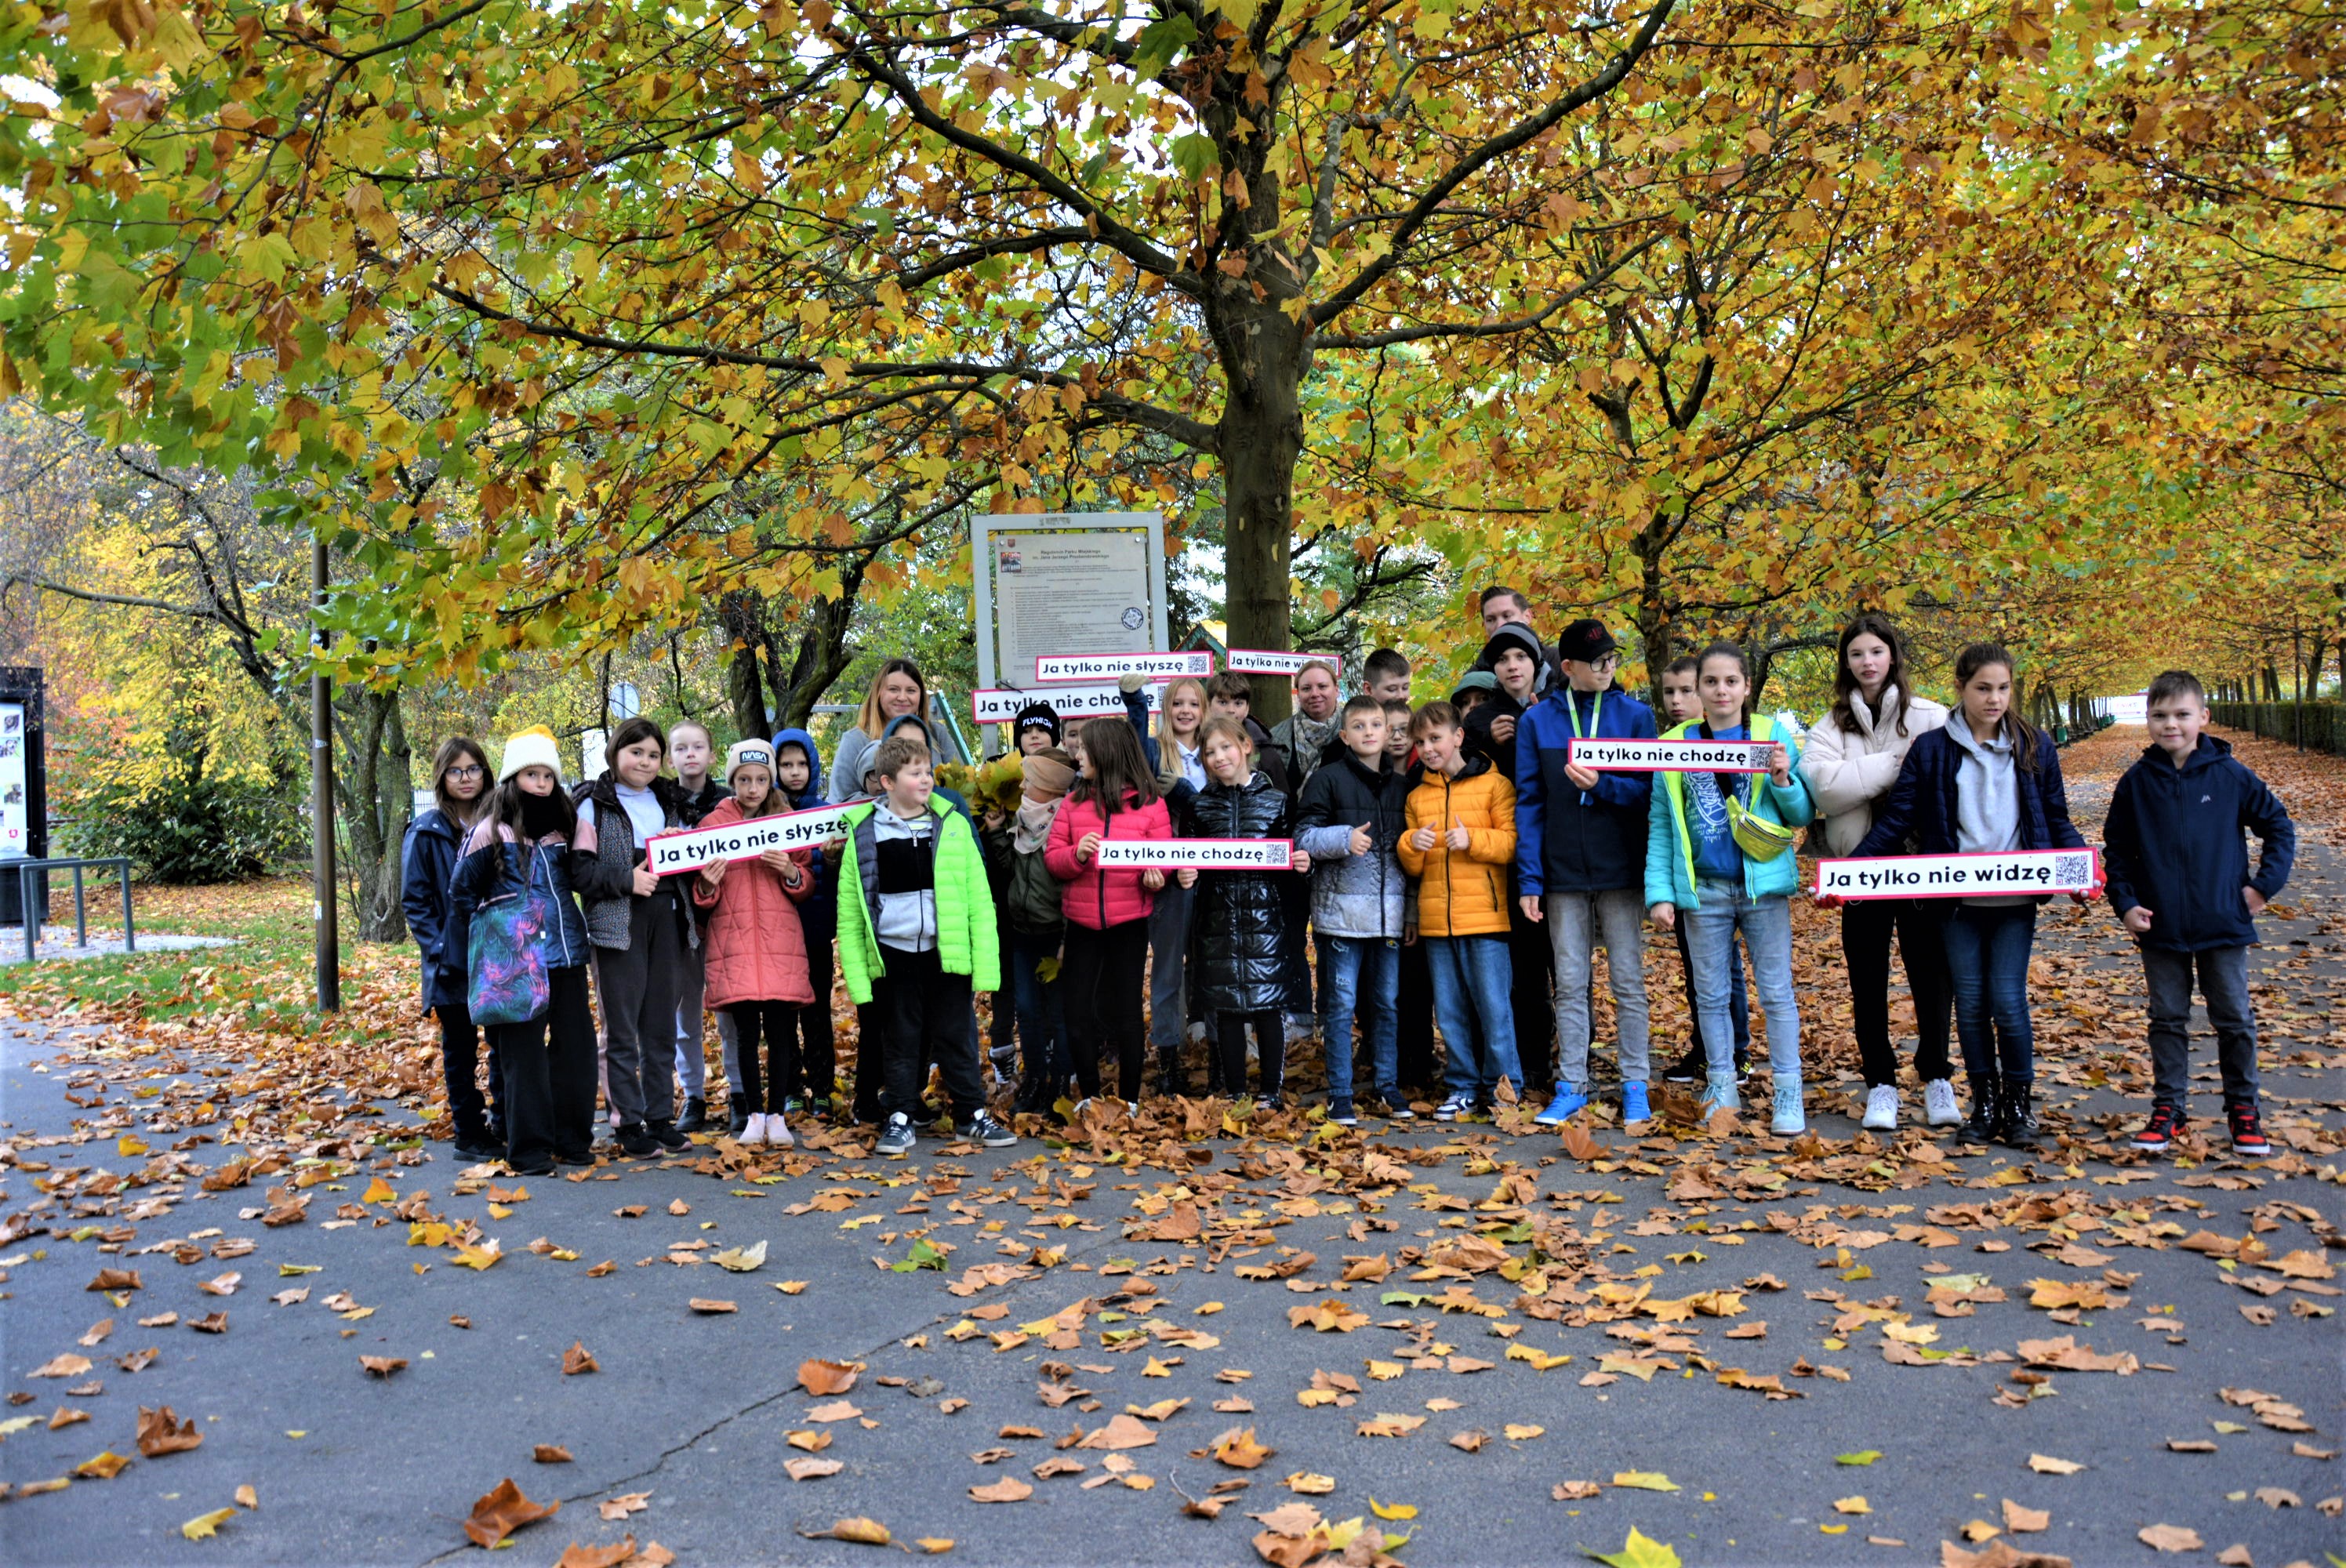 Campaign photo - young people with signs about the project